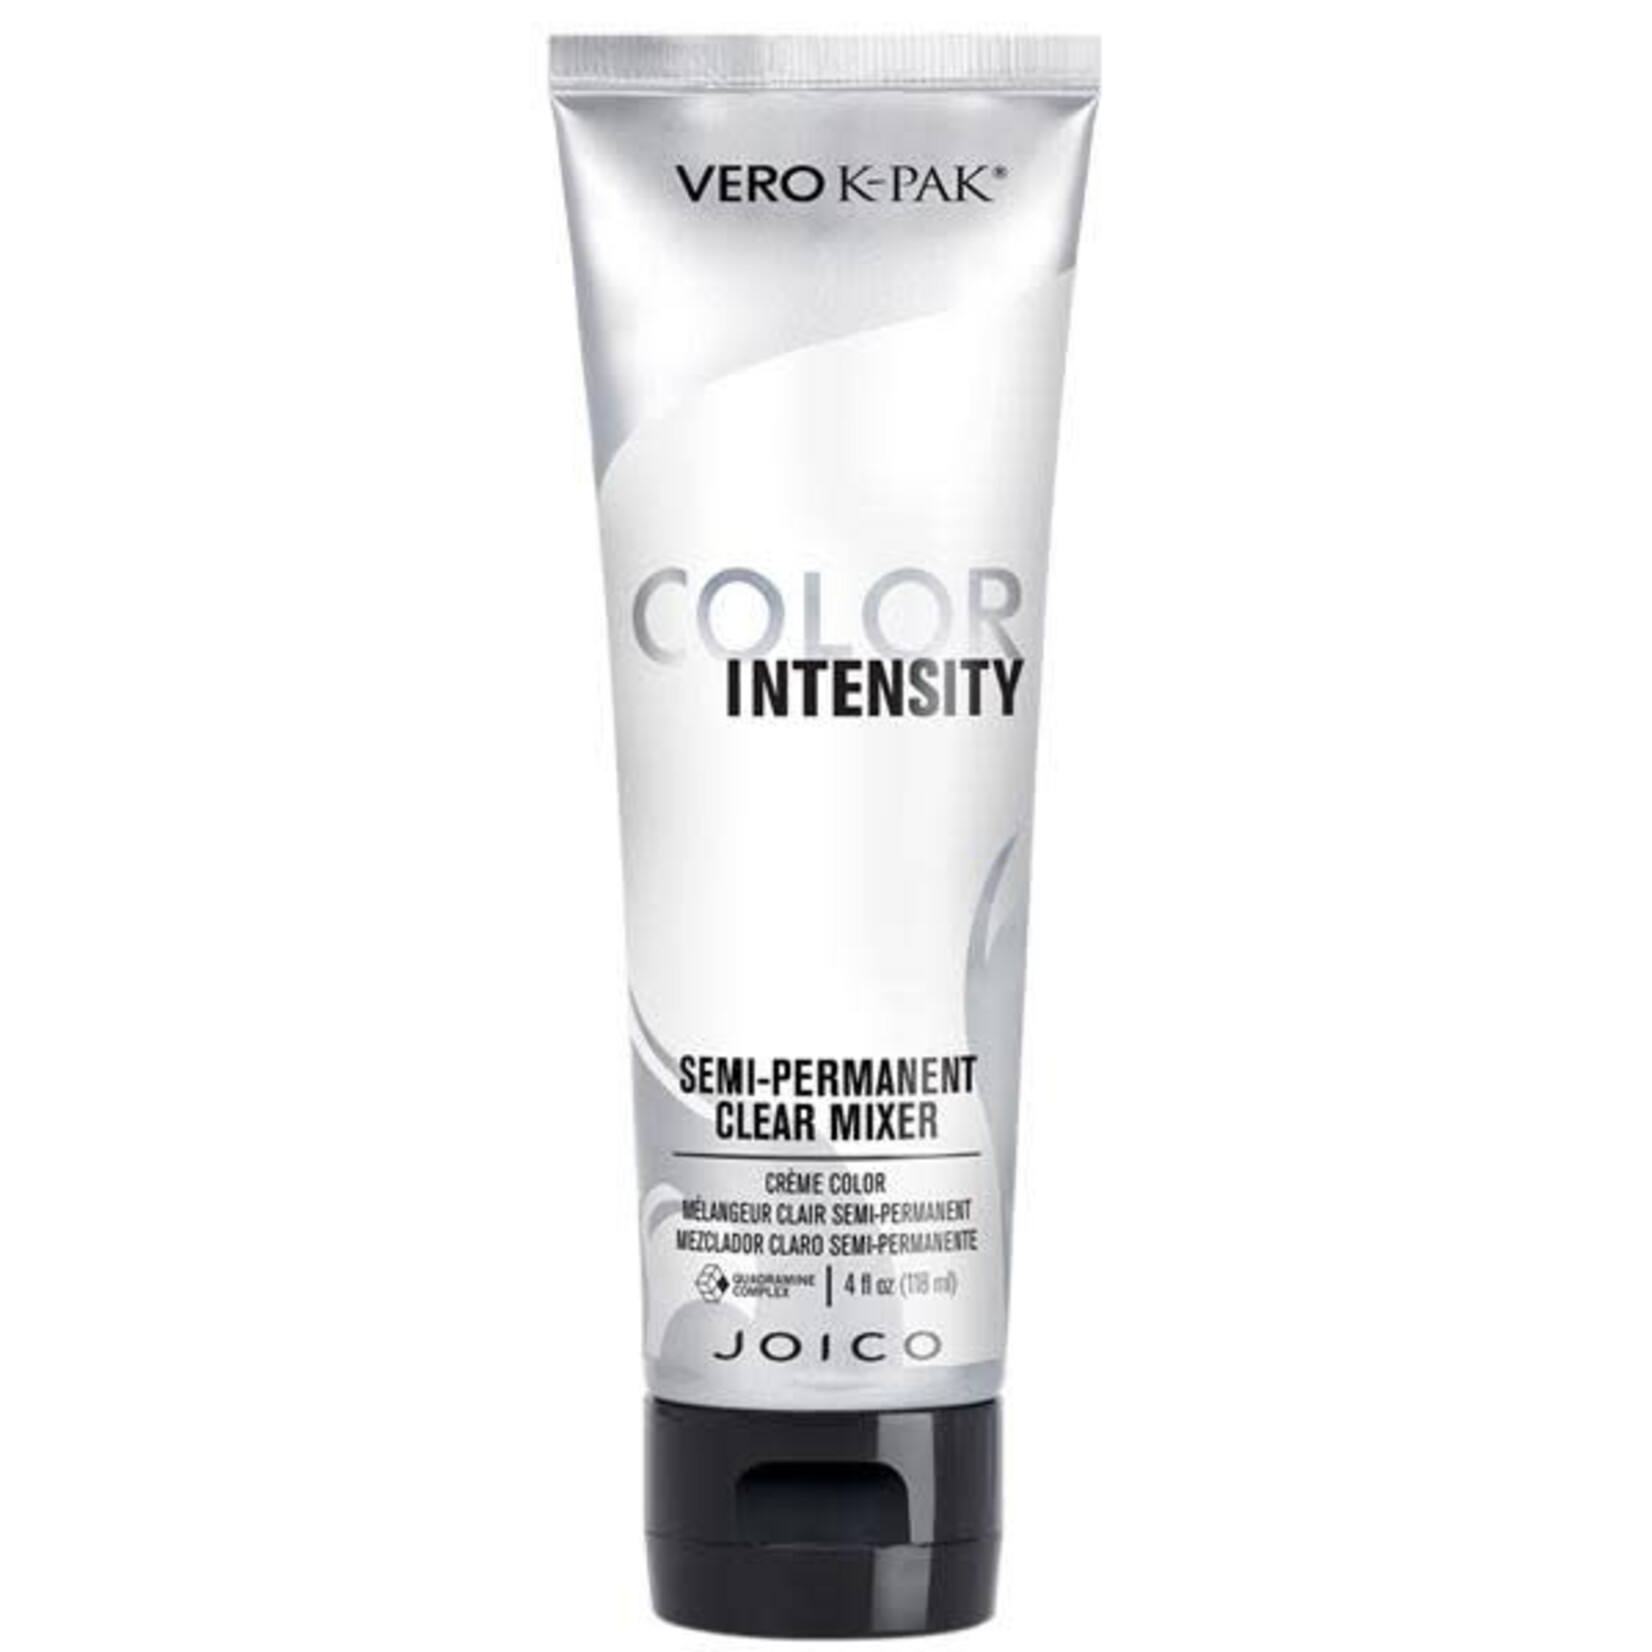 Joico Joico - Color intensity -  118ml